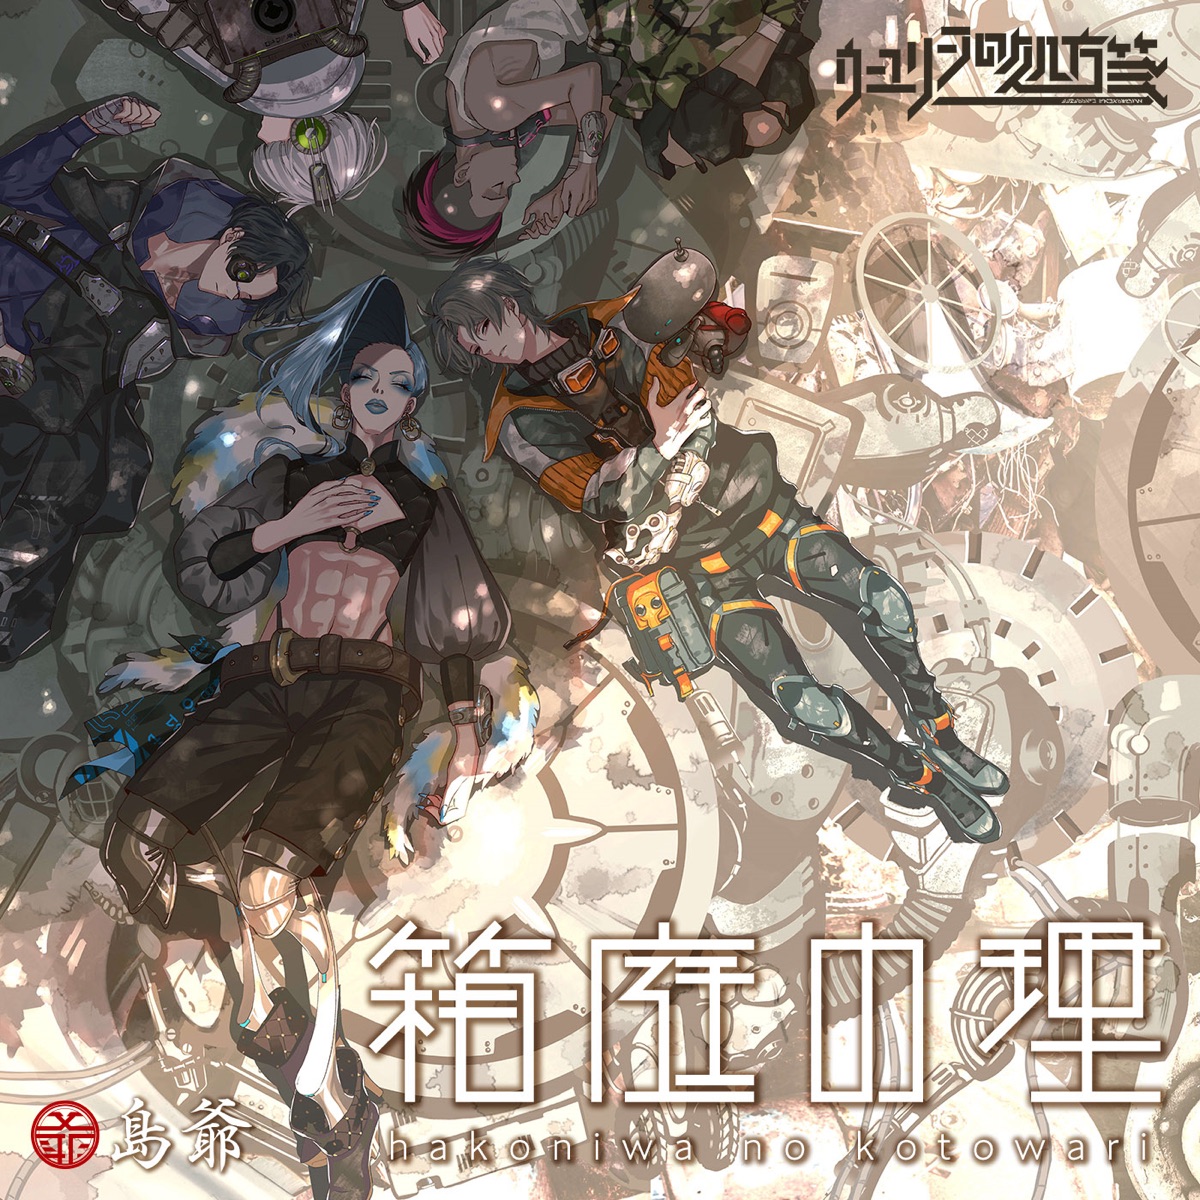 Cover art for『SymaG - 箱庭の理』from the release『Hakoniwa no Kotowari